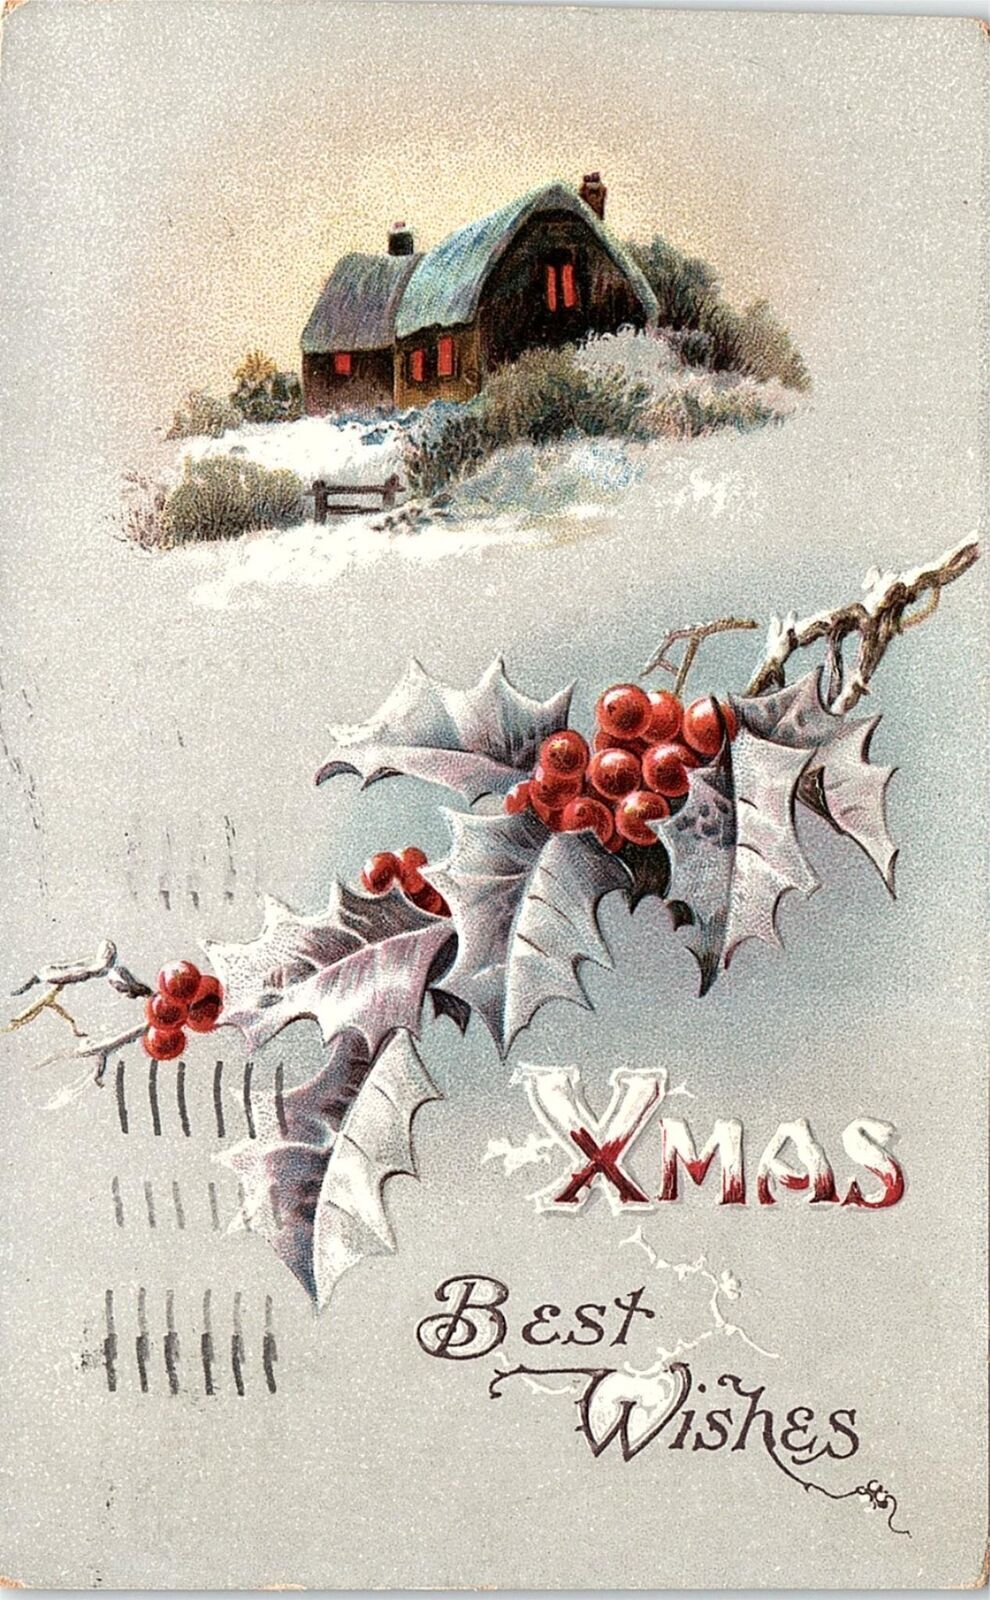 c1915 CHRISTMAS XMAS BEST WISHES HOLLY BERRY WISCONSIN EMBOSSED POSTCARD 41-156